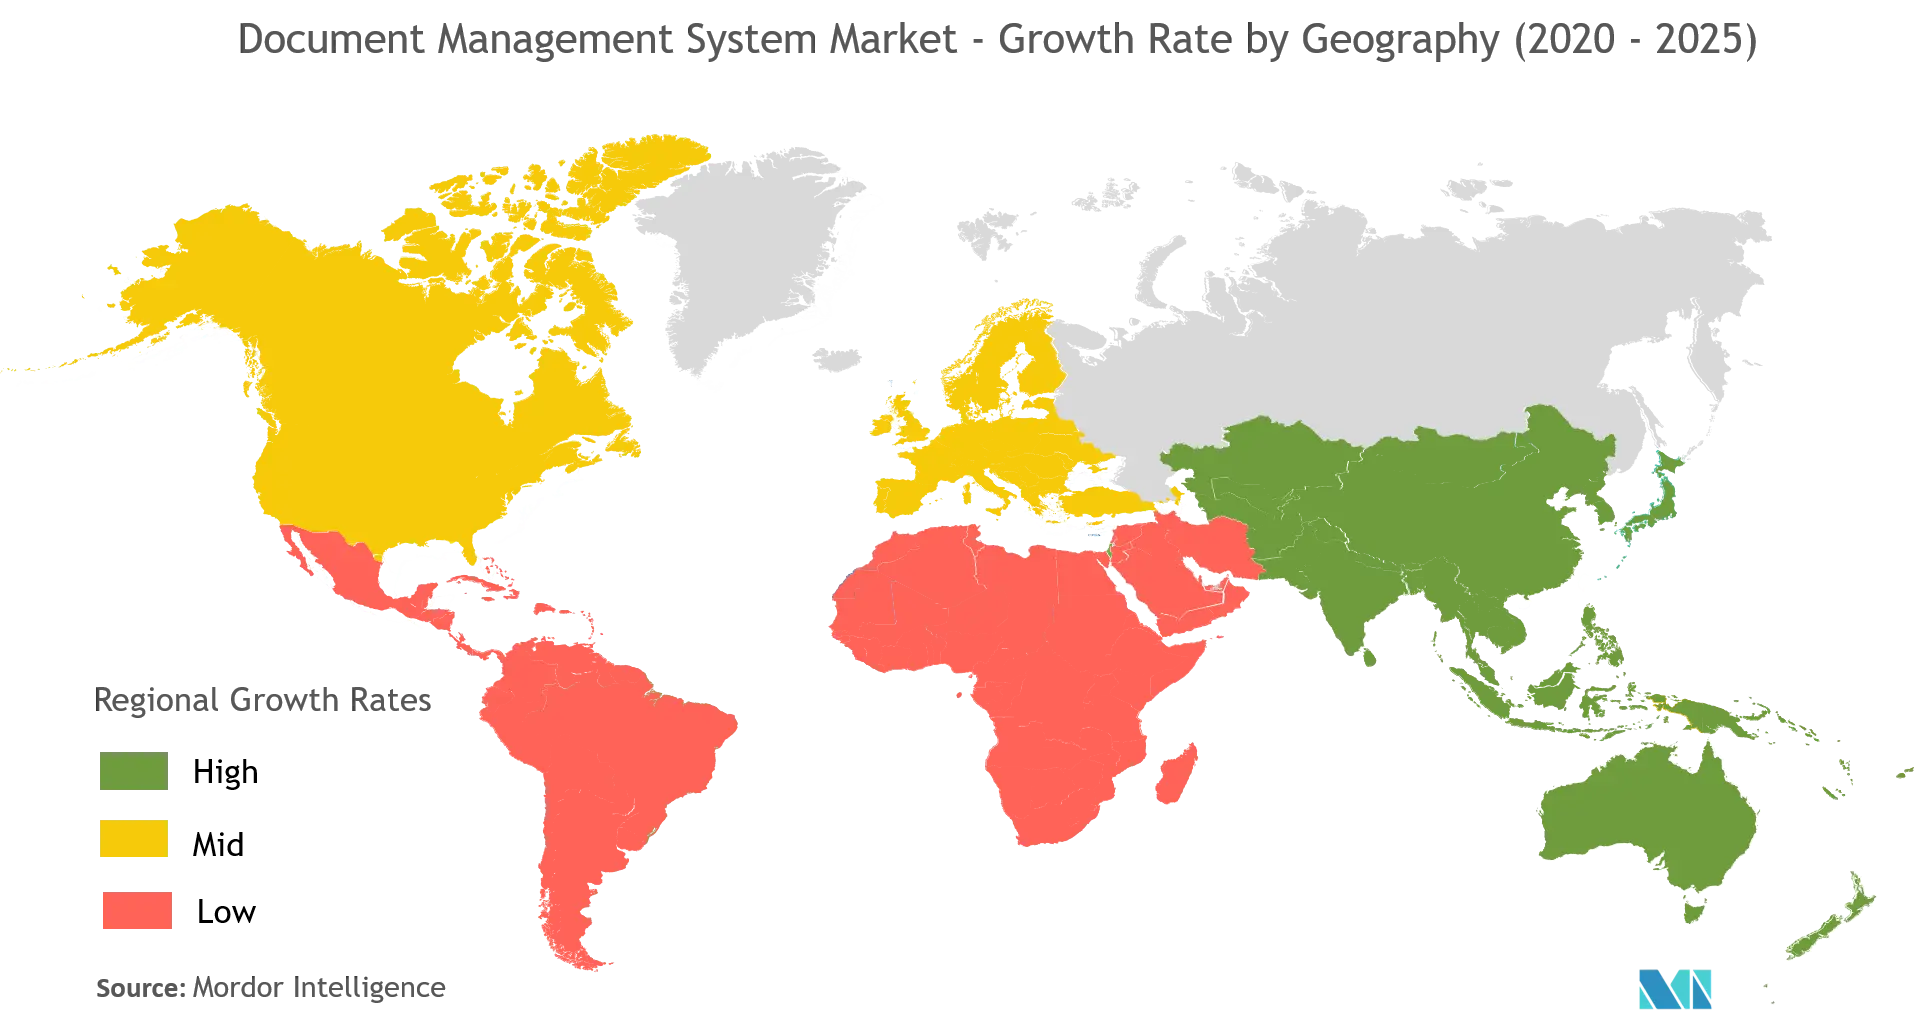 Document Management Systems Market Outlook